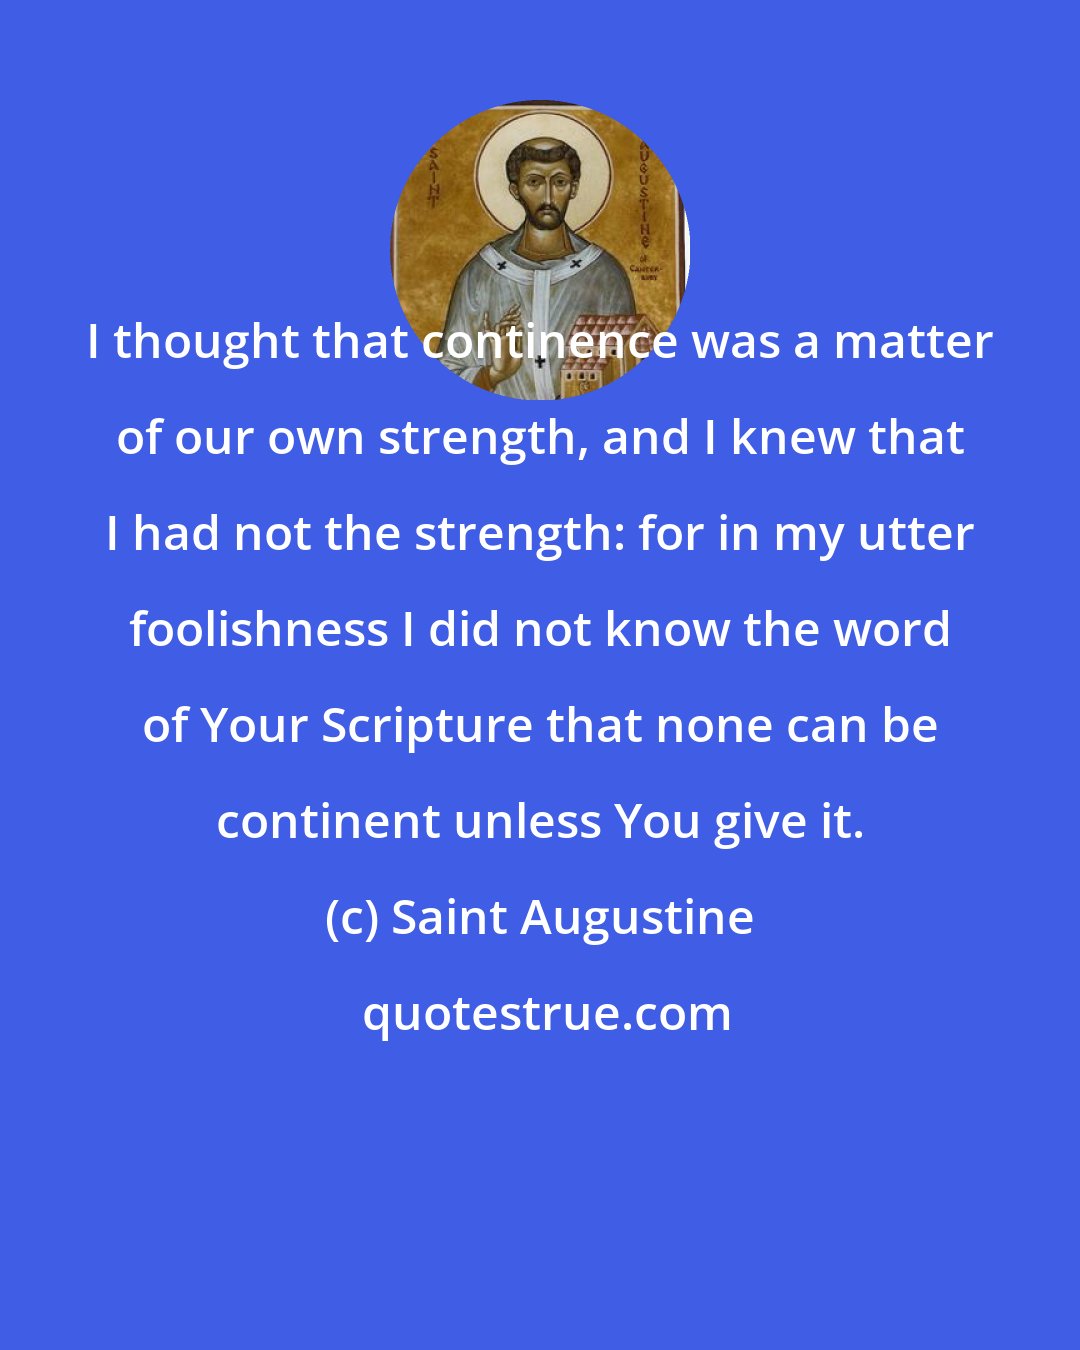 Saint Augustine: I thought that continence was a matter of our own strength, and I knew that I had not the strength: for in my utter foolishness I did not know the word of Your Scripture that none can be continent unless You give it.